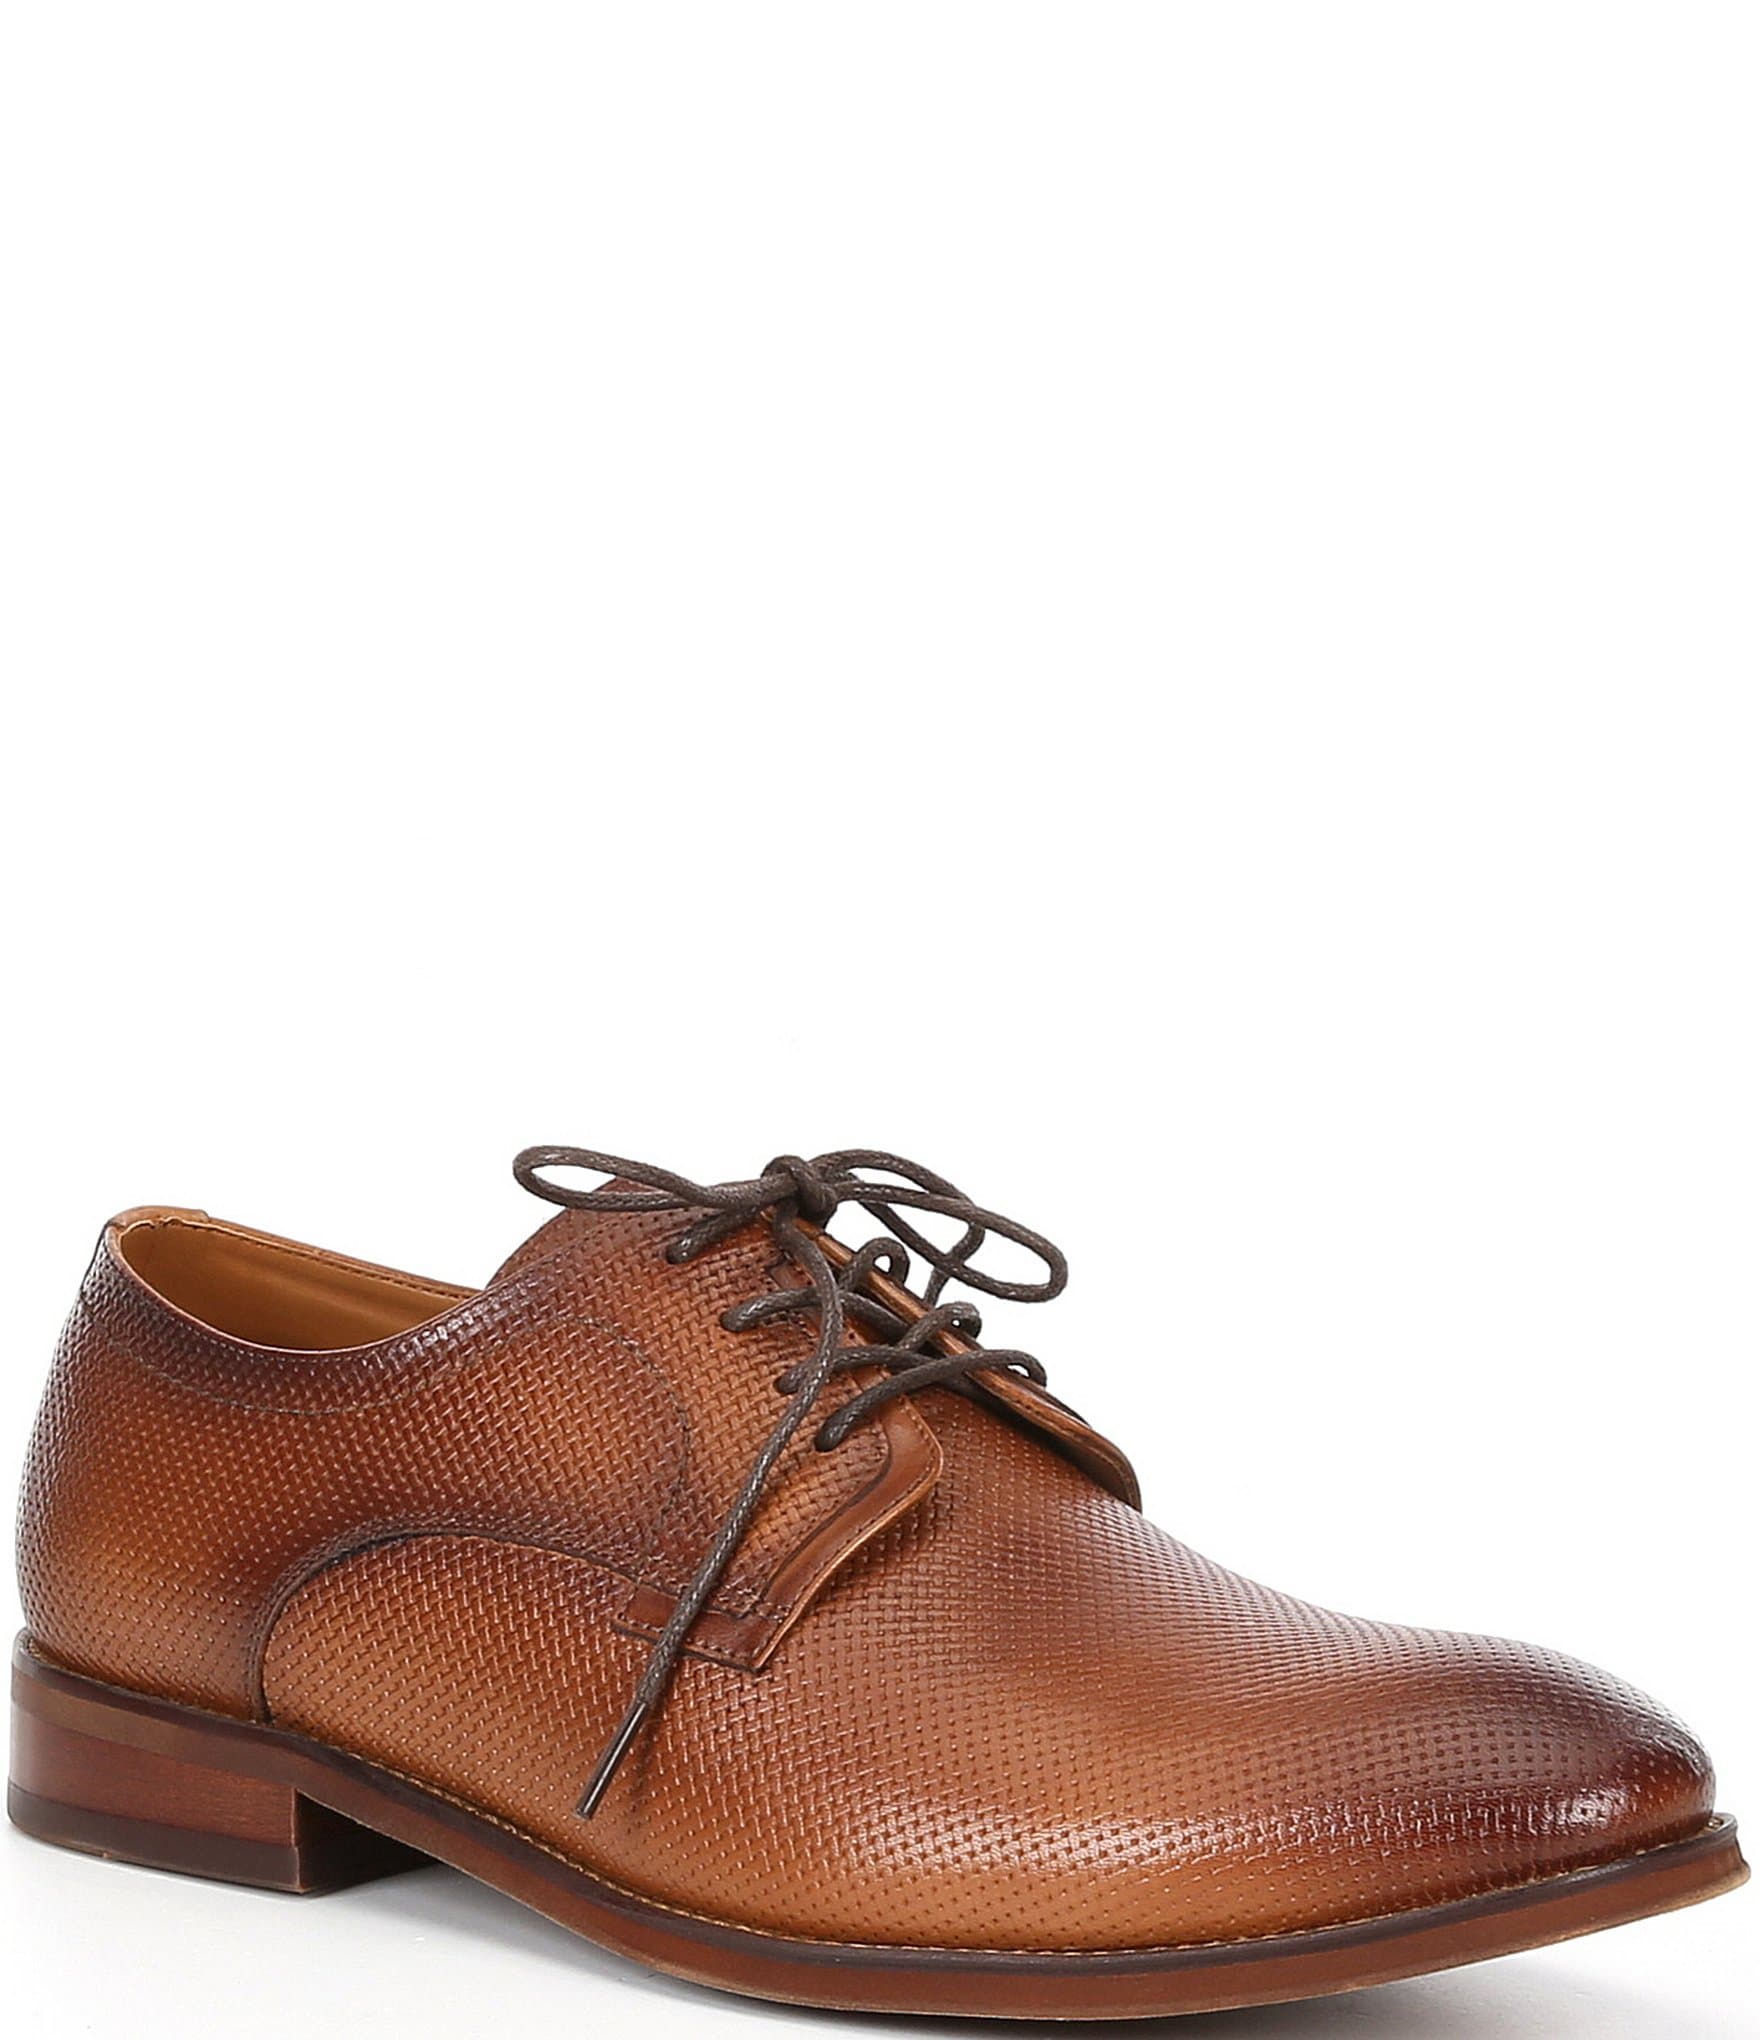 Steve Madden Men's Antero Textured Leather Lace-Up Oxfords | Dillard's